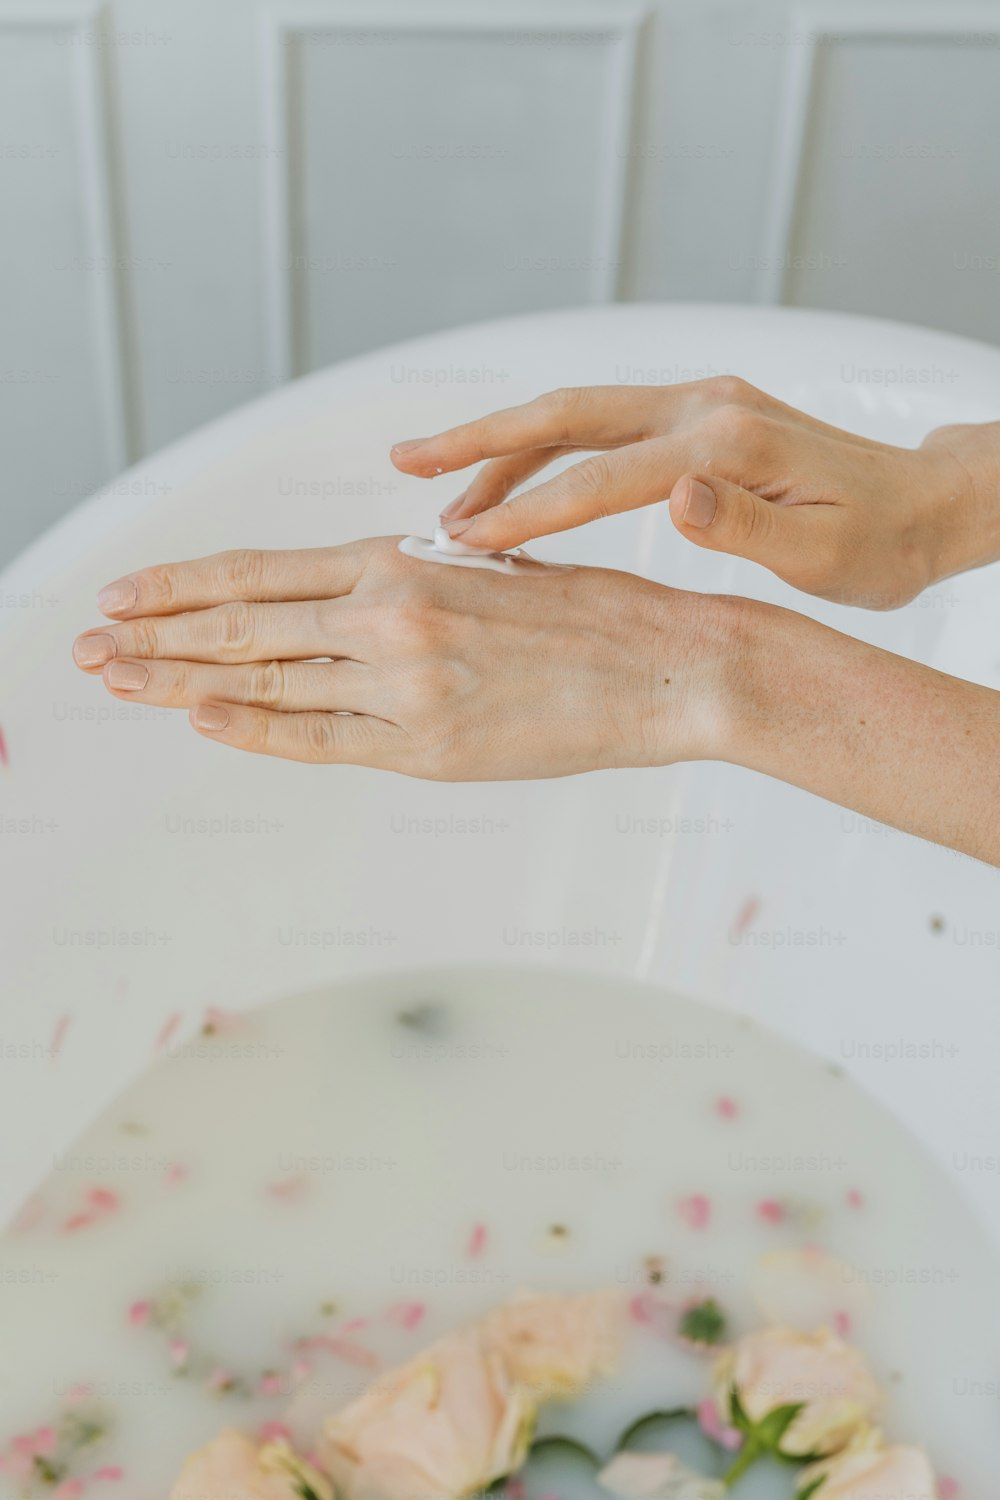 a woman's hands are washing her hands with soap